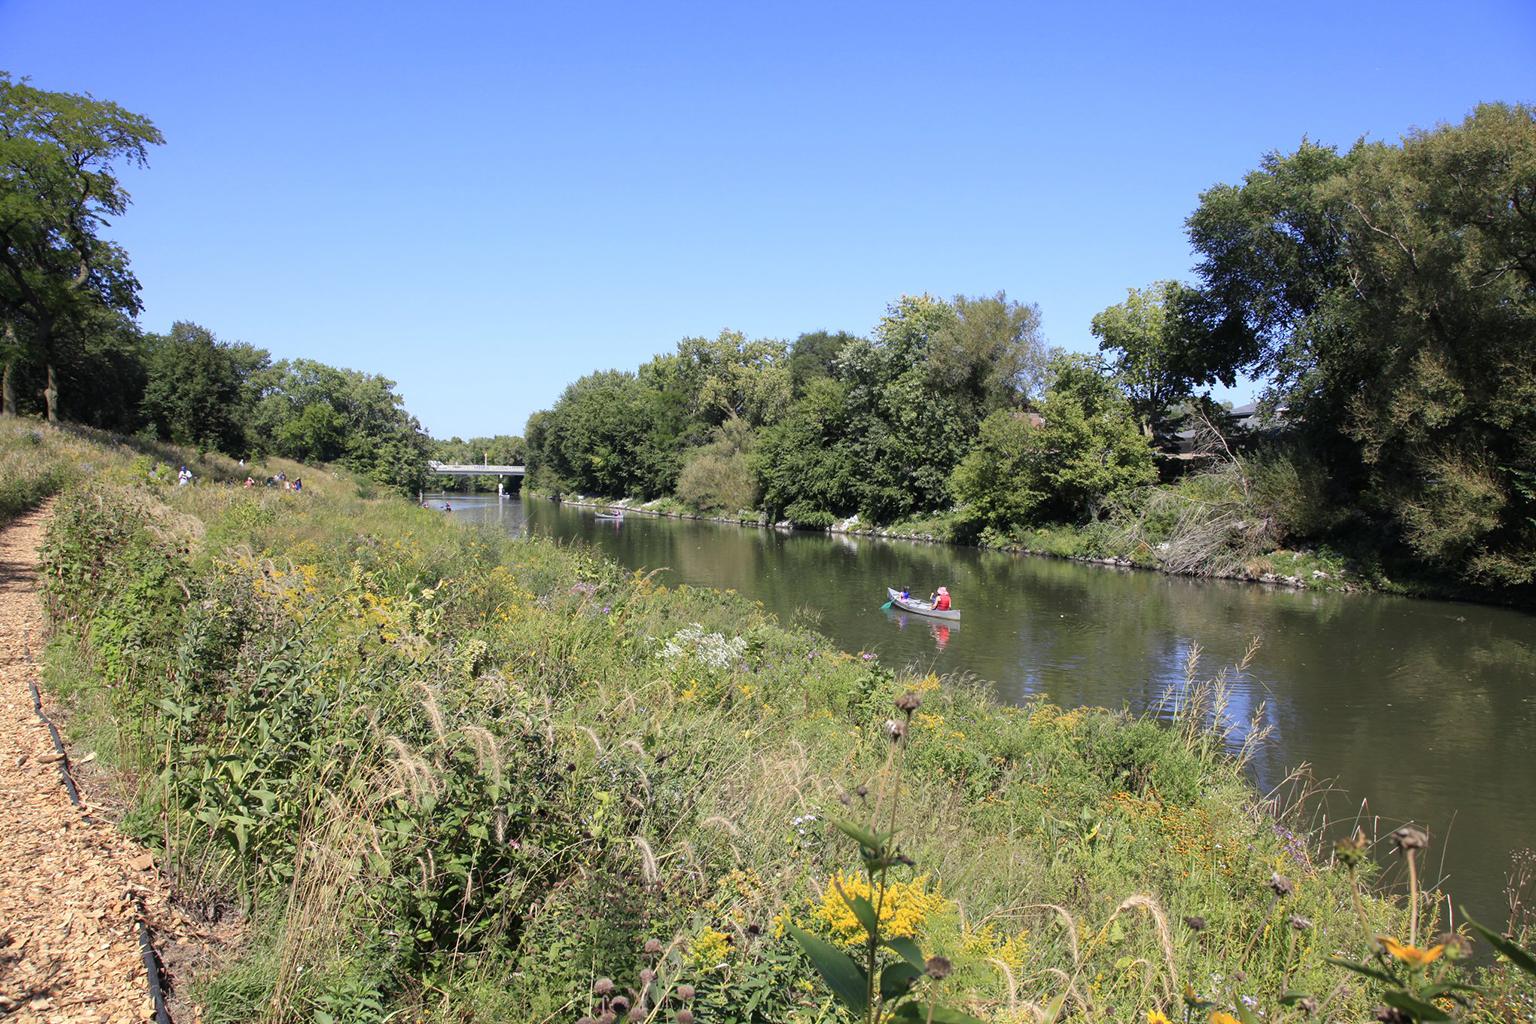 The North Branch of the Chicago River near Montrose Avenue in Horner Park. (Courtesy U.S. Army Corps of Engineers)